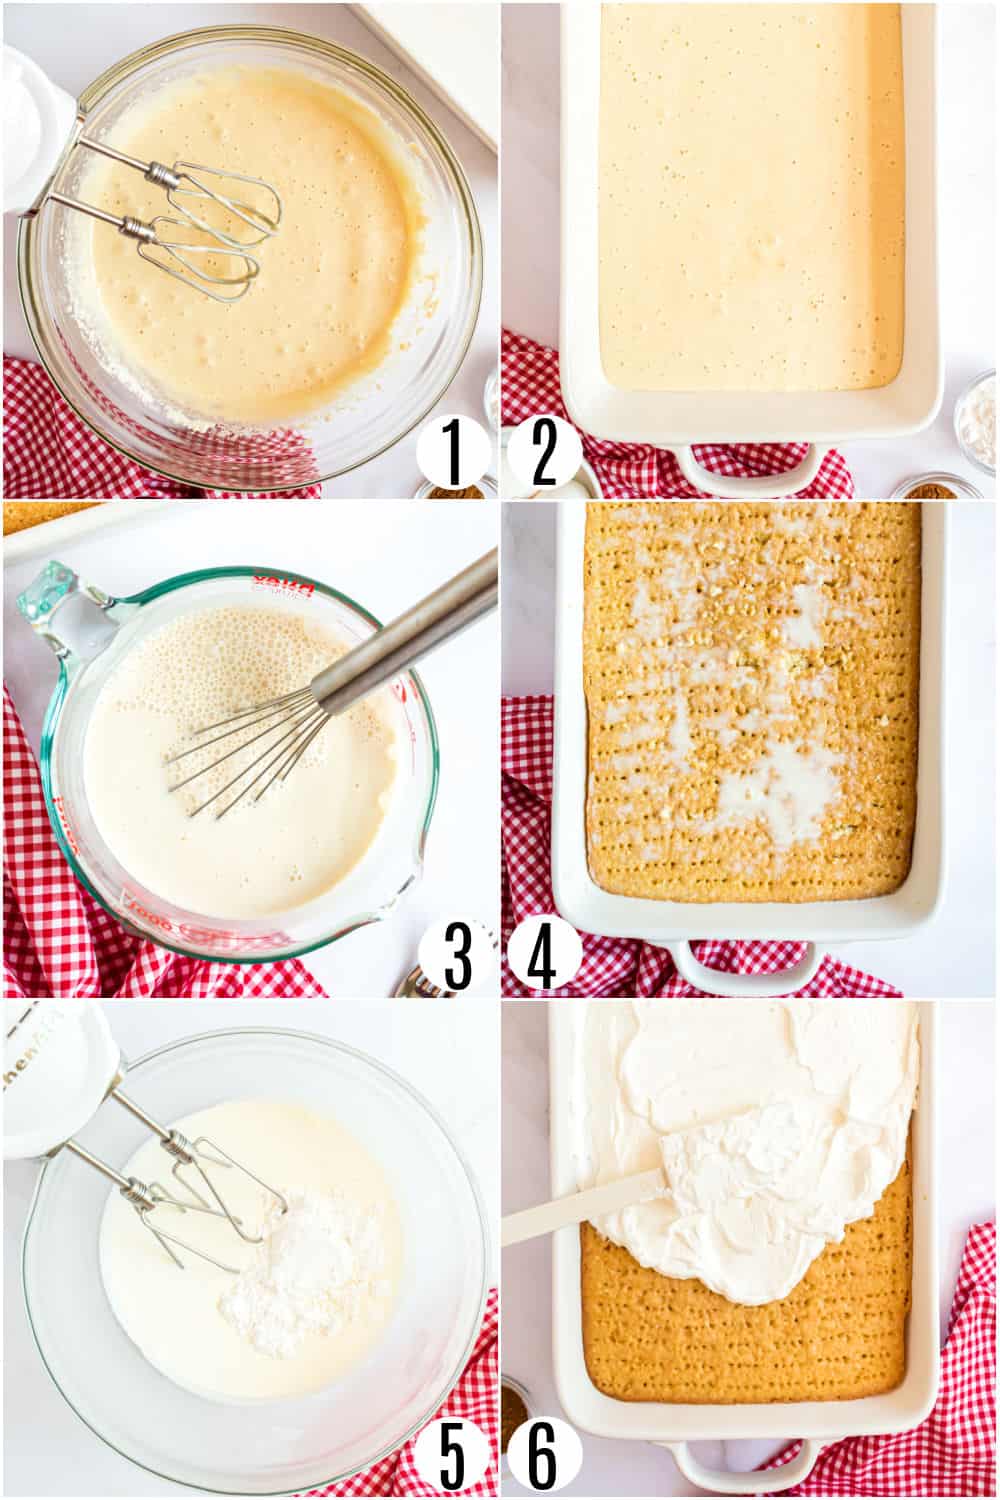 Step by step photos showing how to make tres leches cake.